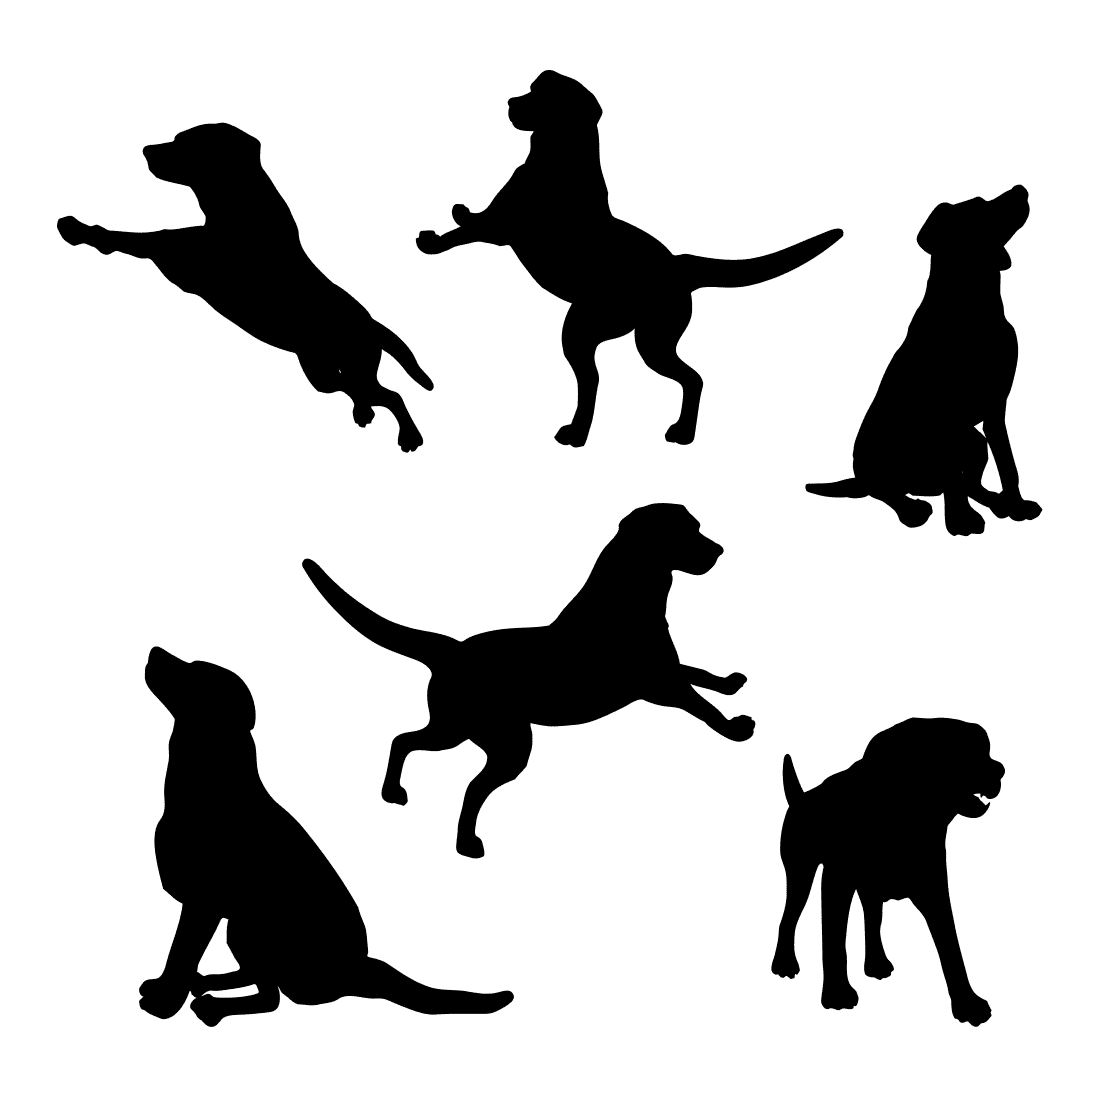 Image of a silhouette of a golden retriever playing and spending its time actively.